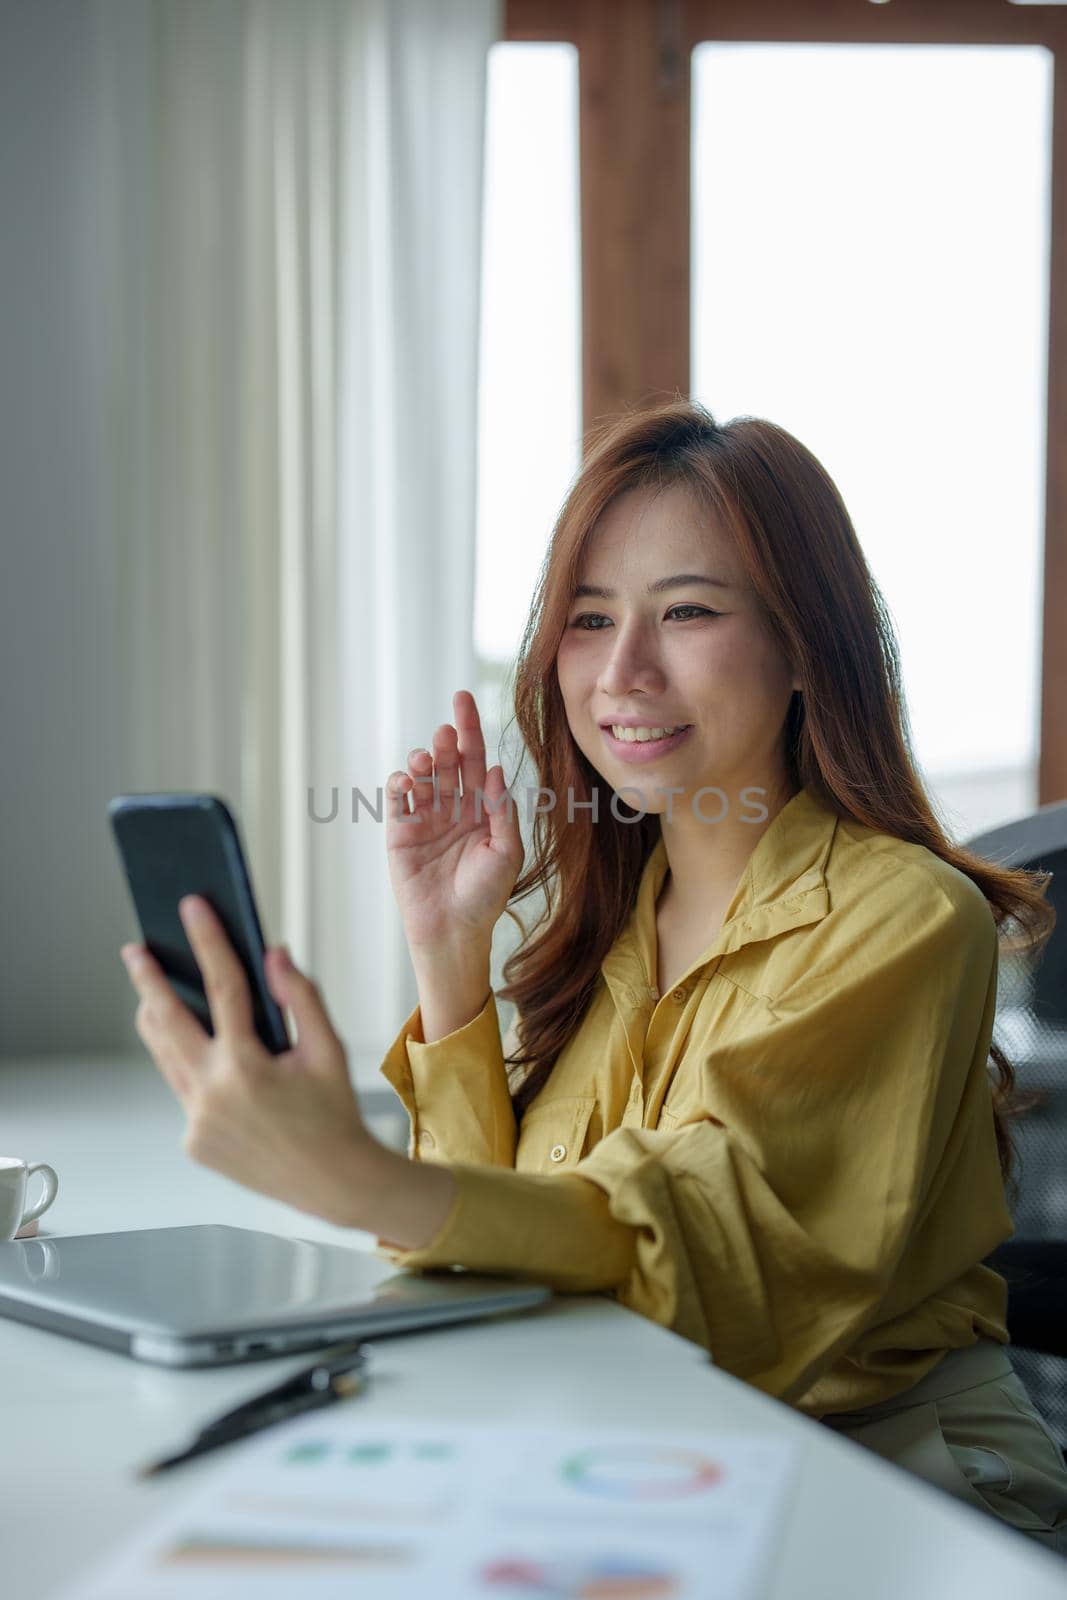 Portrait of a woman using her phone to make video calls or call a friend while taking a break at her desk.